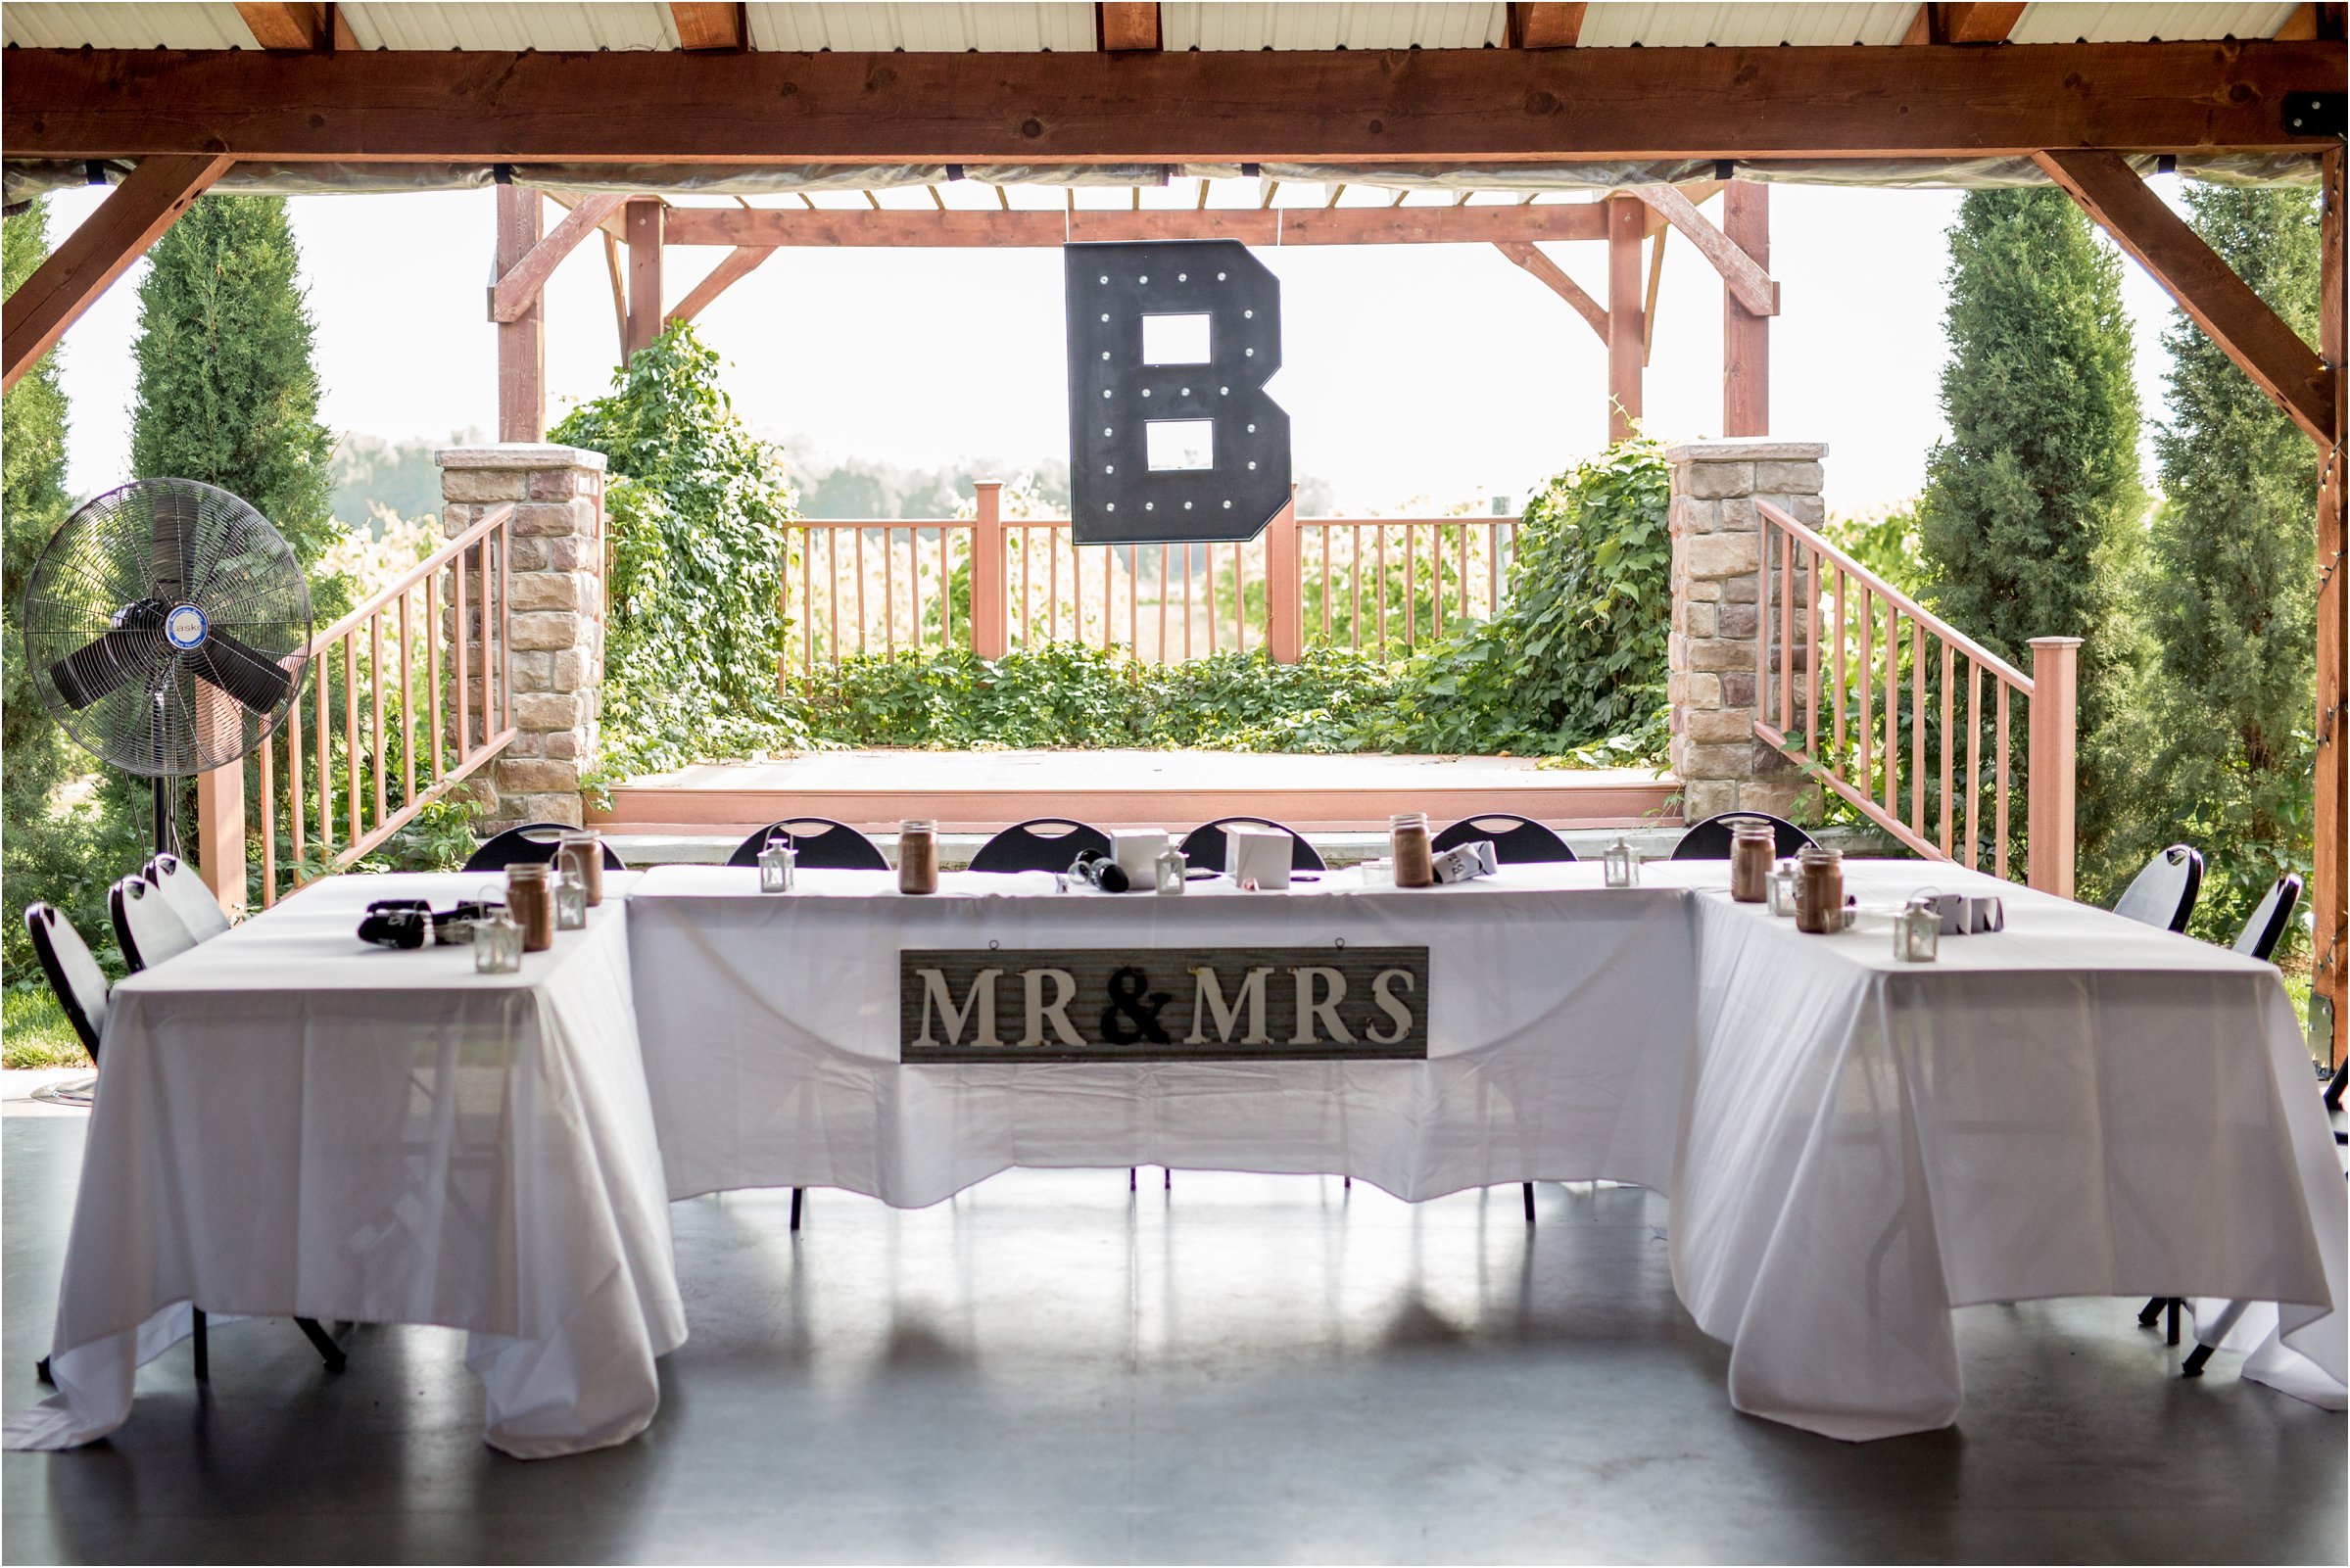 the head table with a large lit letter b placed above with a mr. and mrs. sign